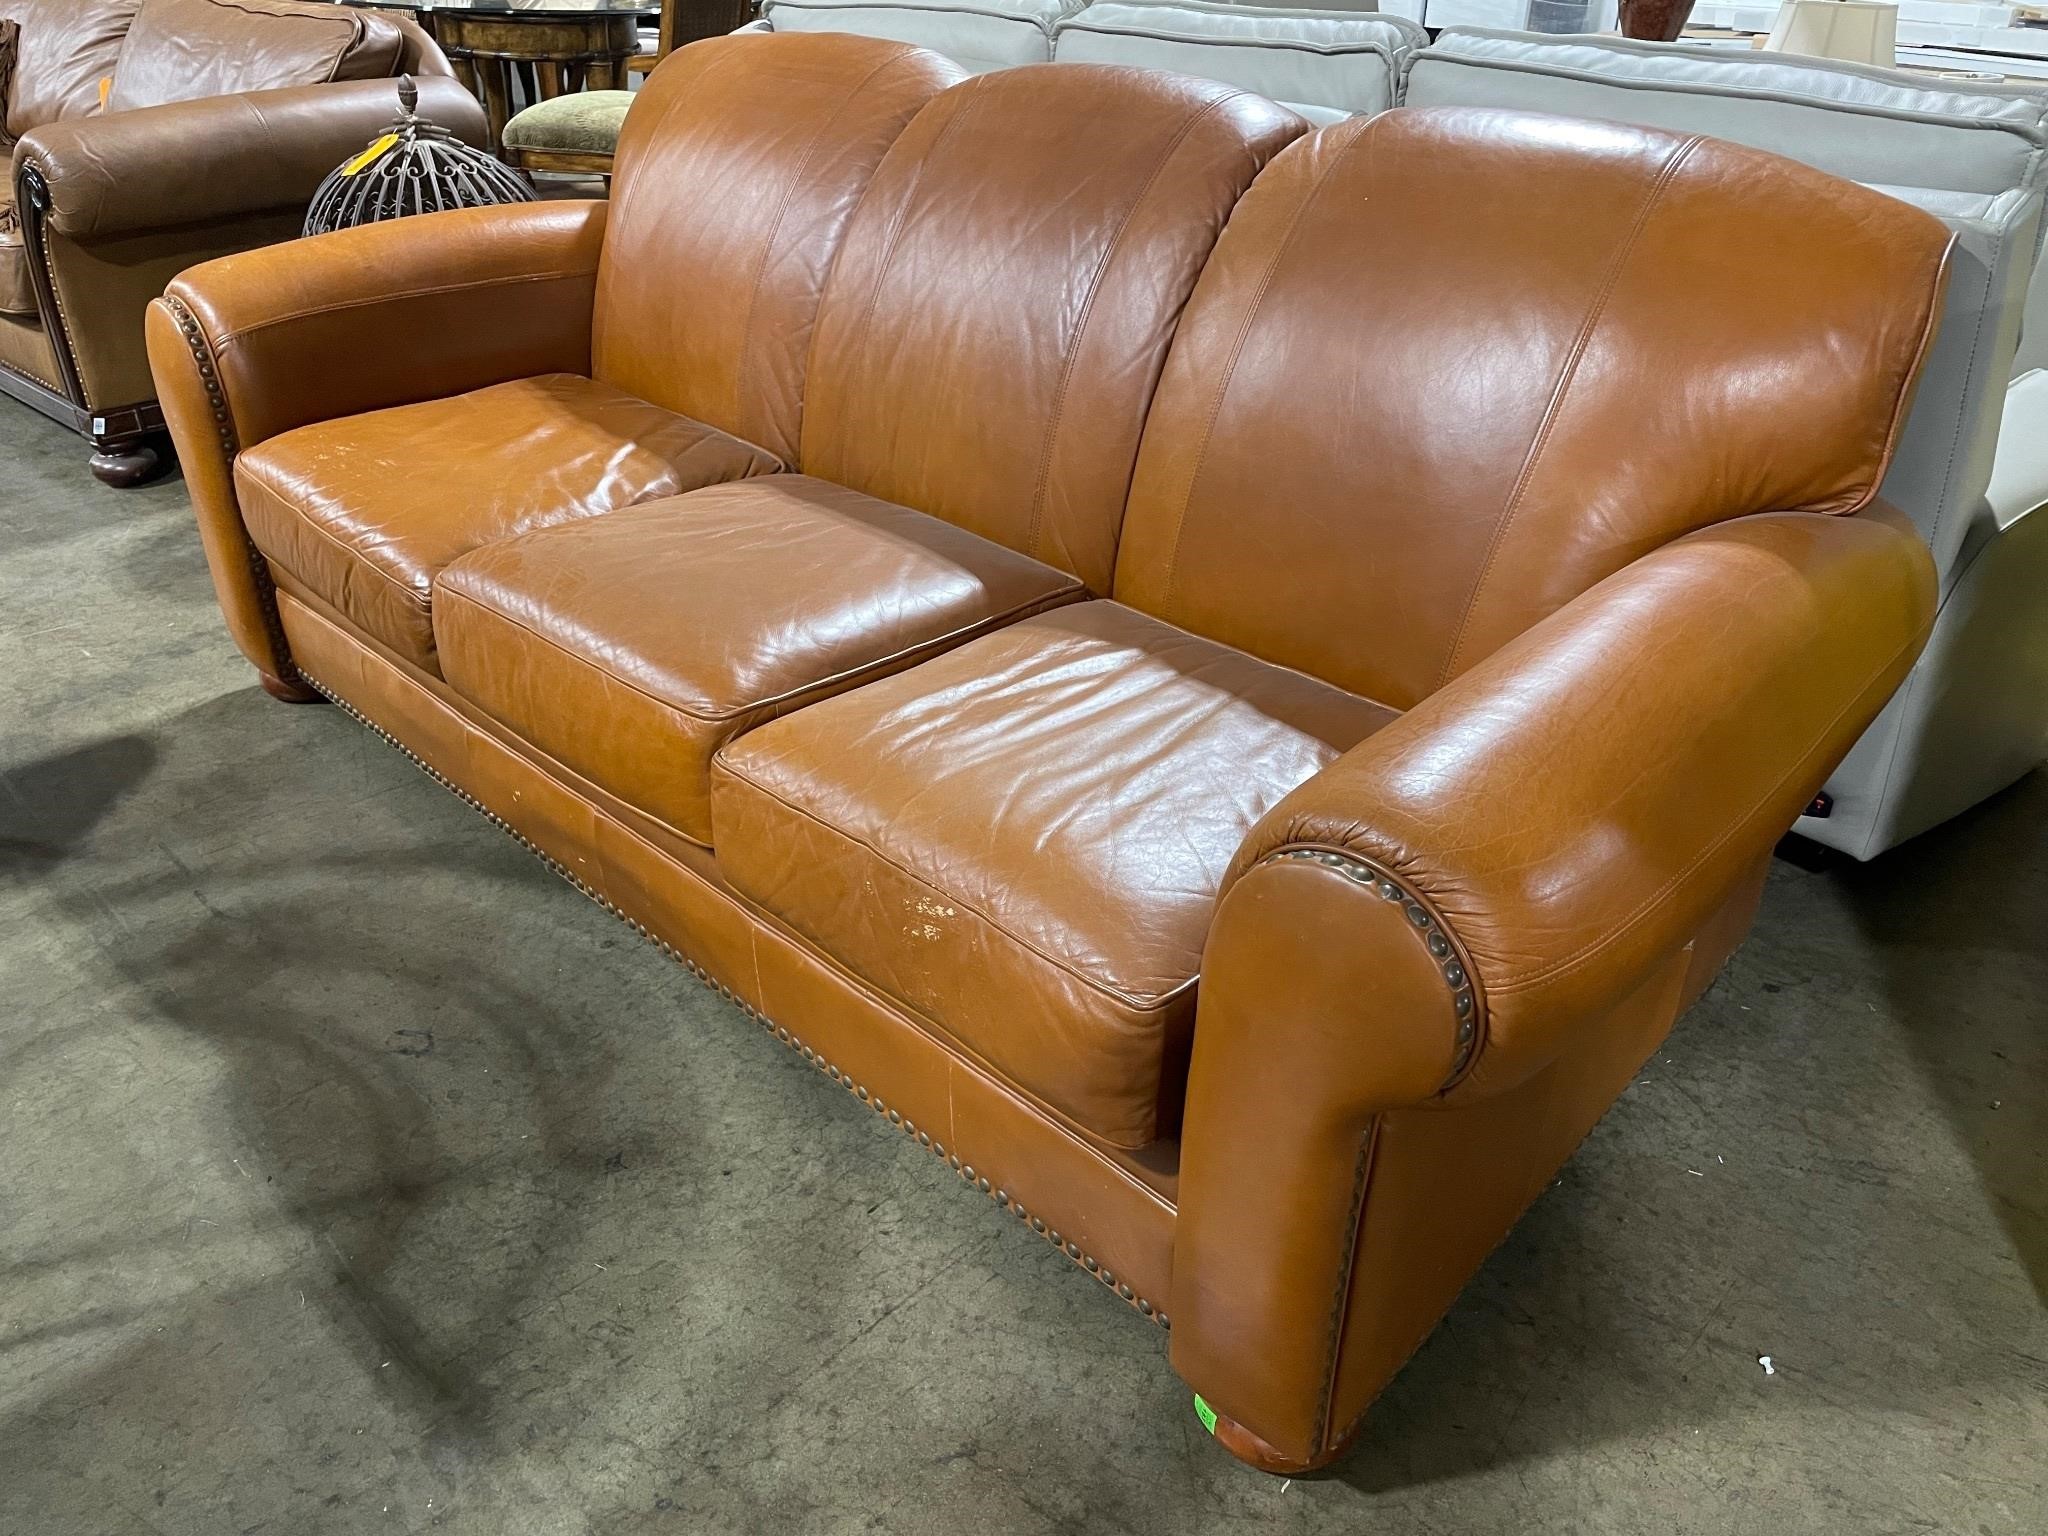 Distressed brown leather sofa